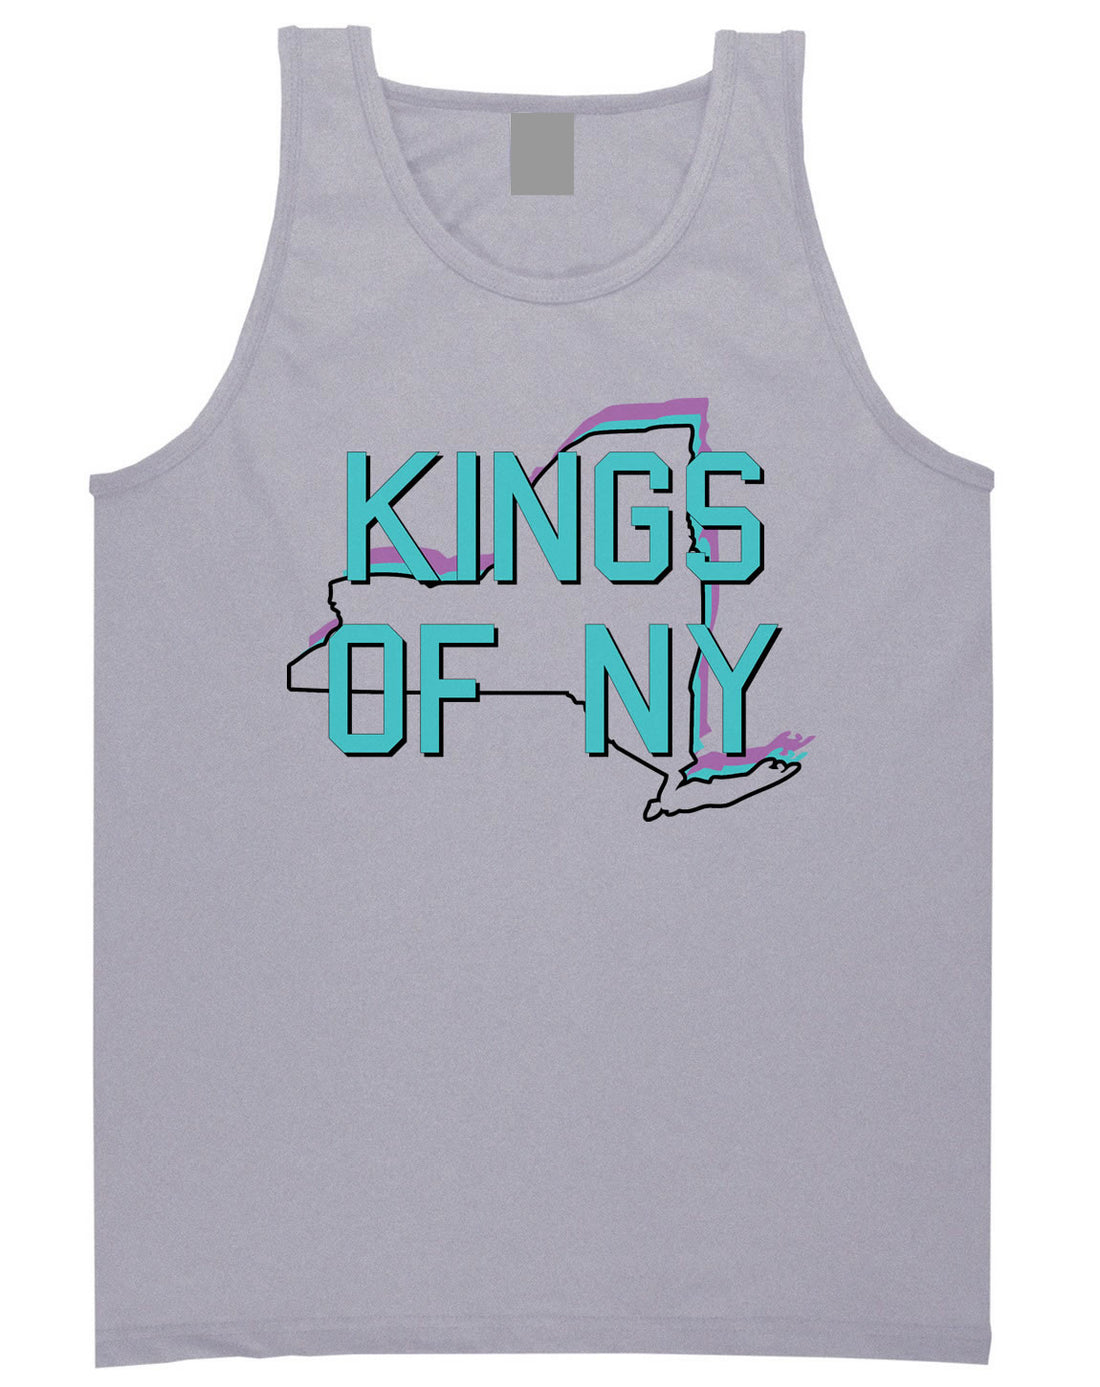 New York State Outline Tank Top in Grey by Kings Of NY